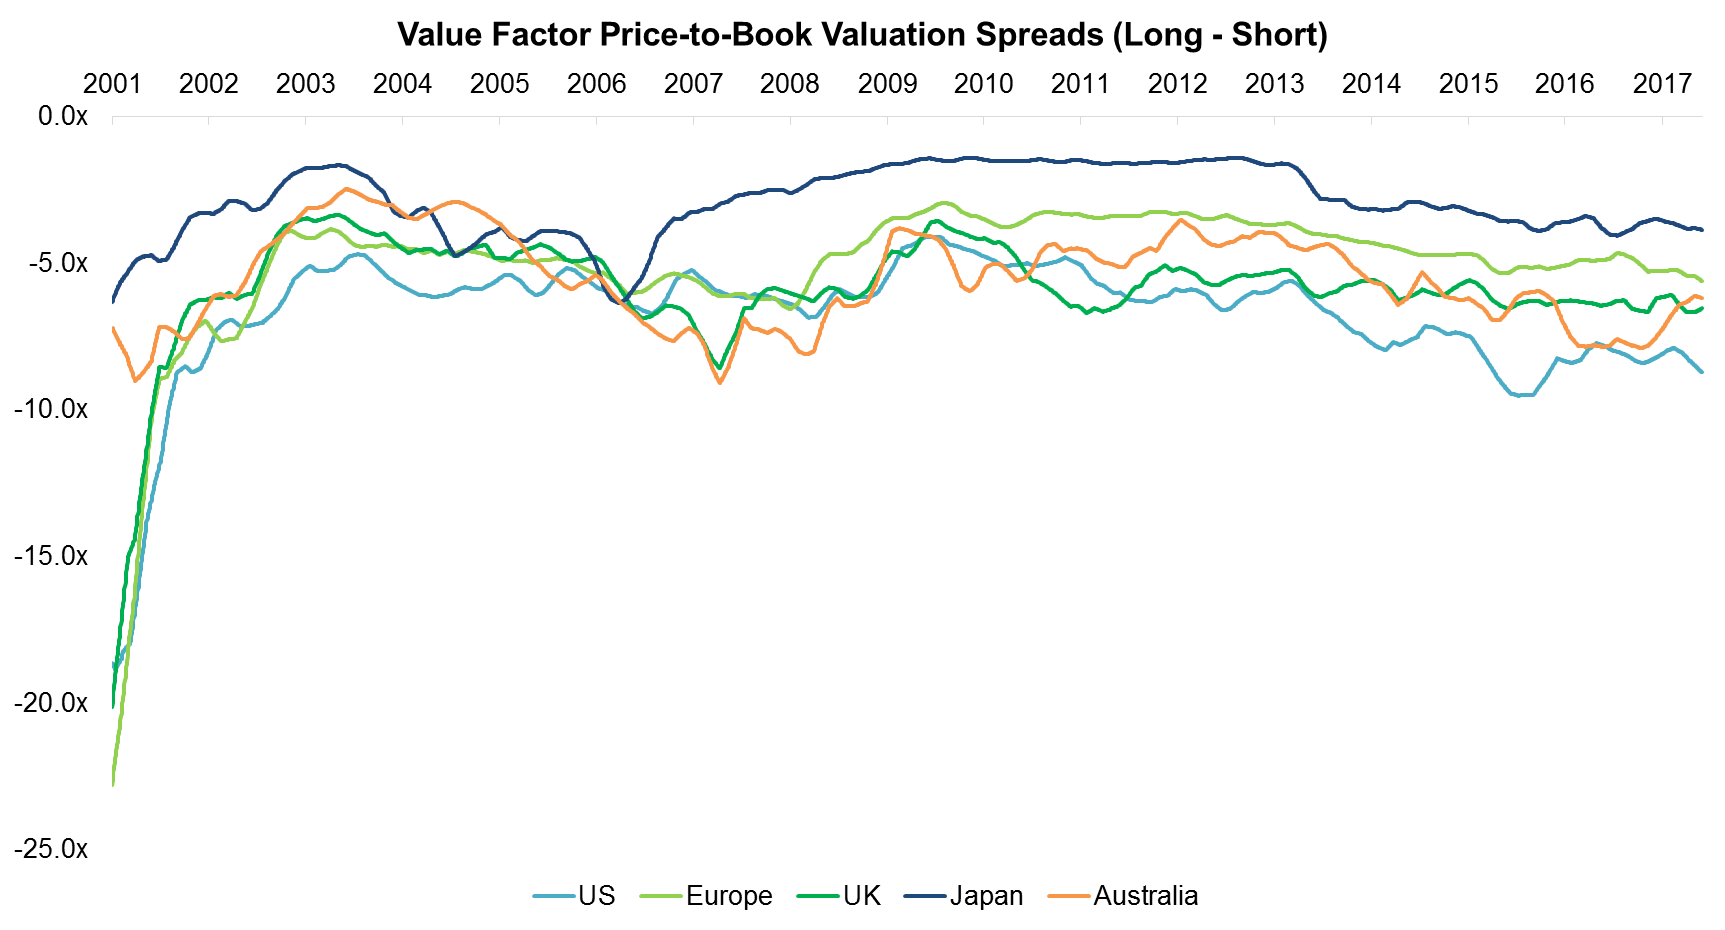 Value Factor Price-to-Book Valuation Spreads (Long - Short)